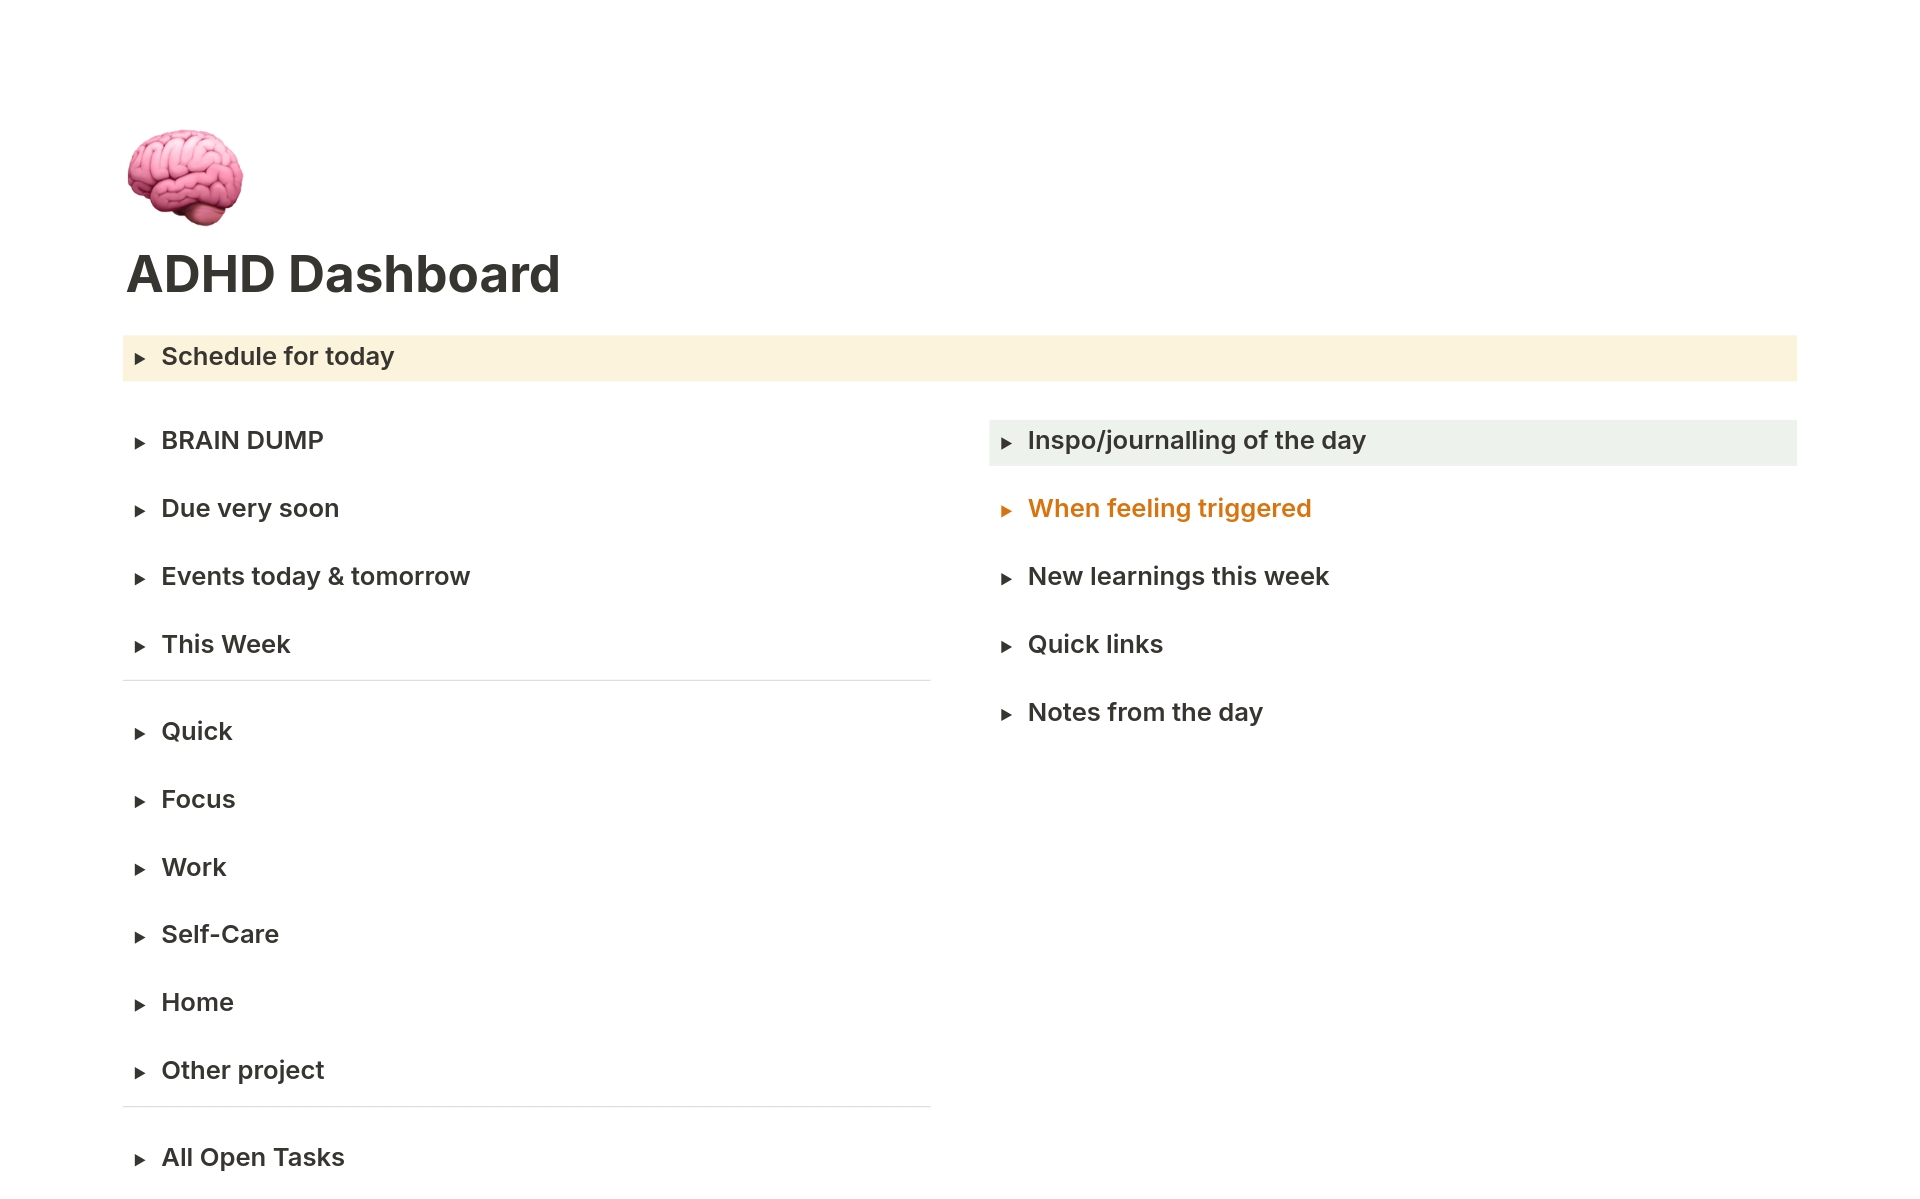 A dashboard optimised for the ADHD brain which is also interested in self-improvement, habits & managing emotional wellbeing. Use this to plan tasks, projects, and daily schedules, and also manage content your ADHD brain picks up along the way.